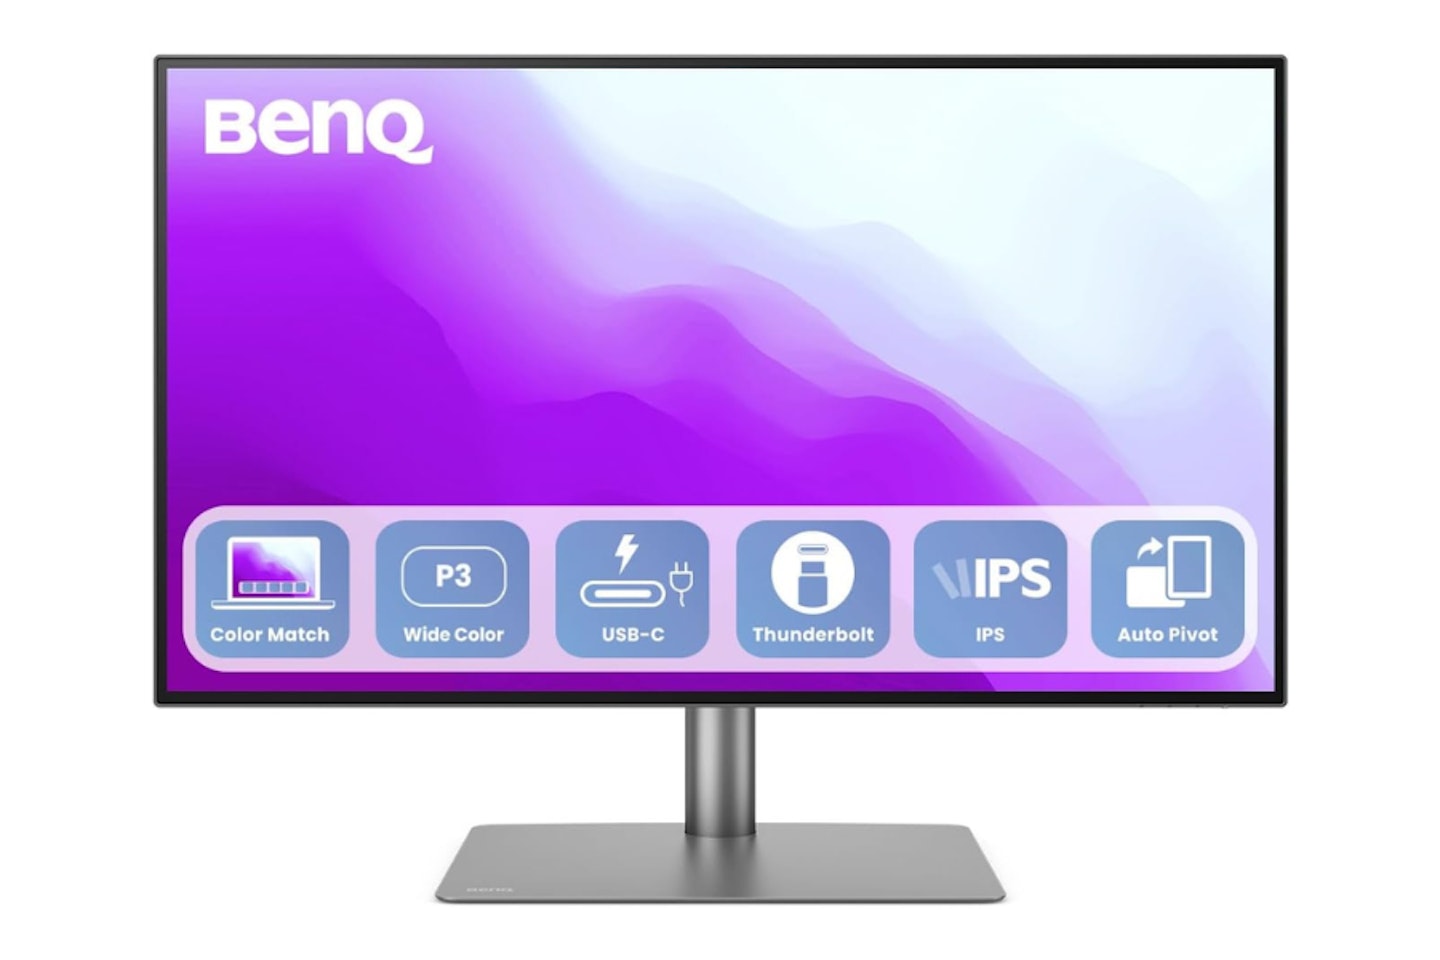 BenQ PD3220U Designer Monitor  - one of the best monitors for photo editing